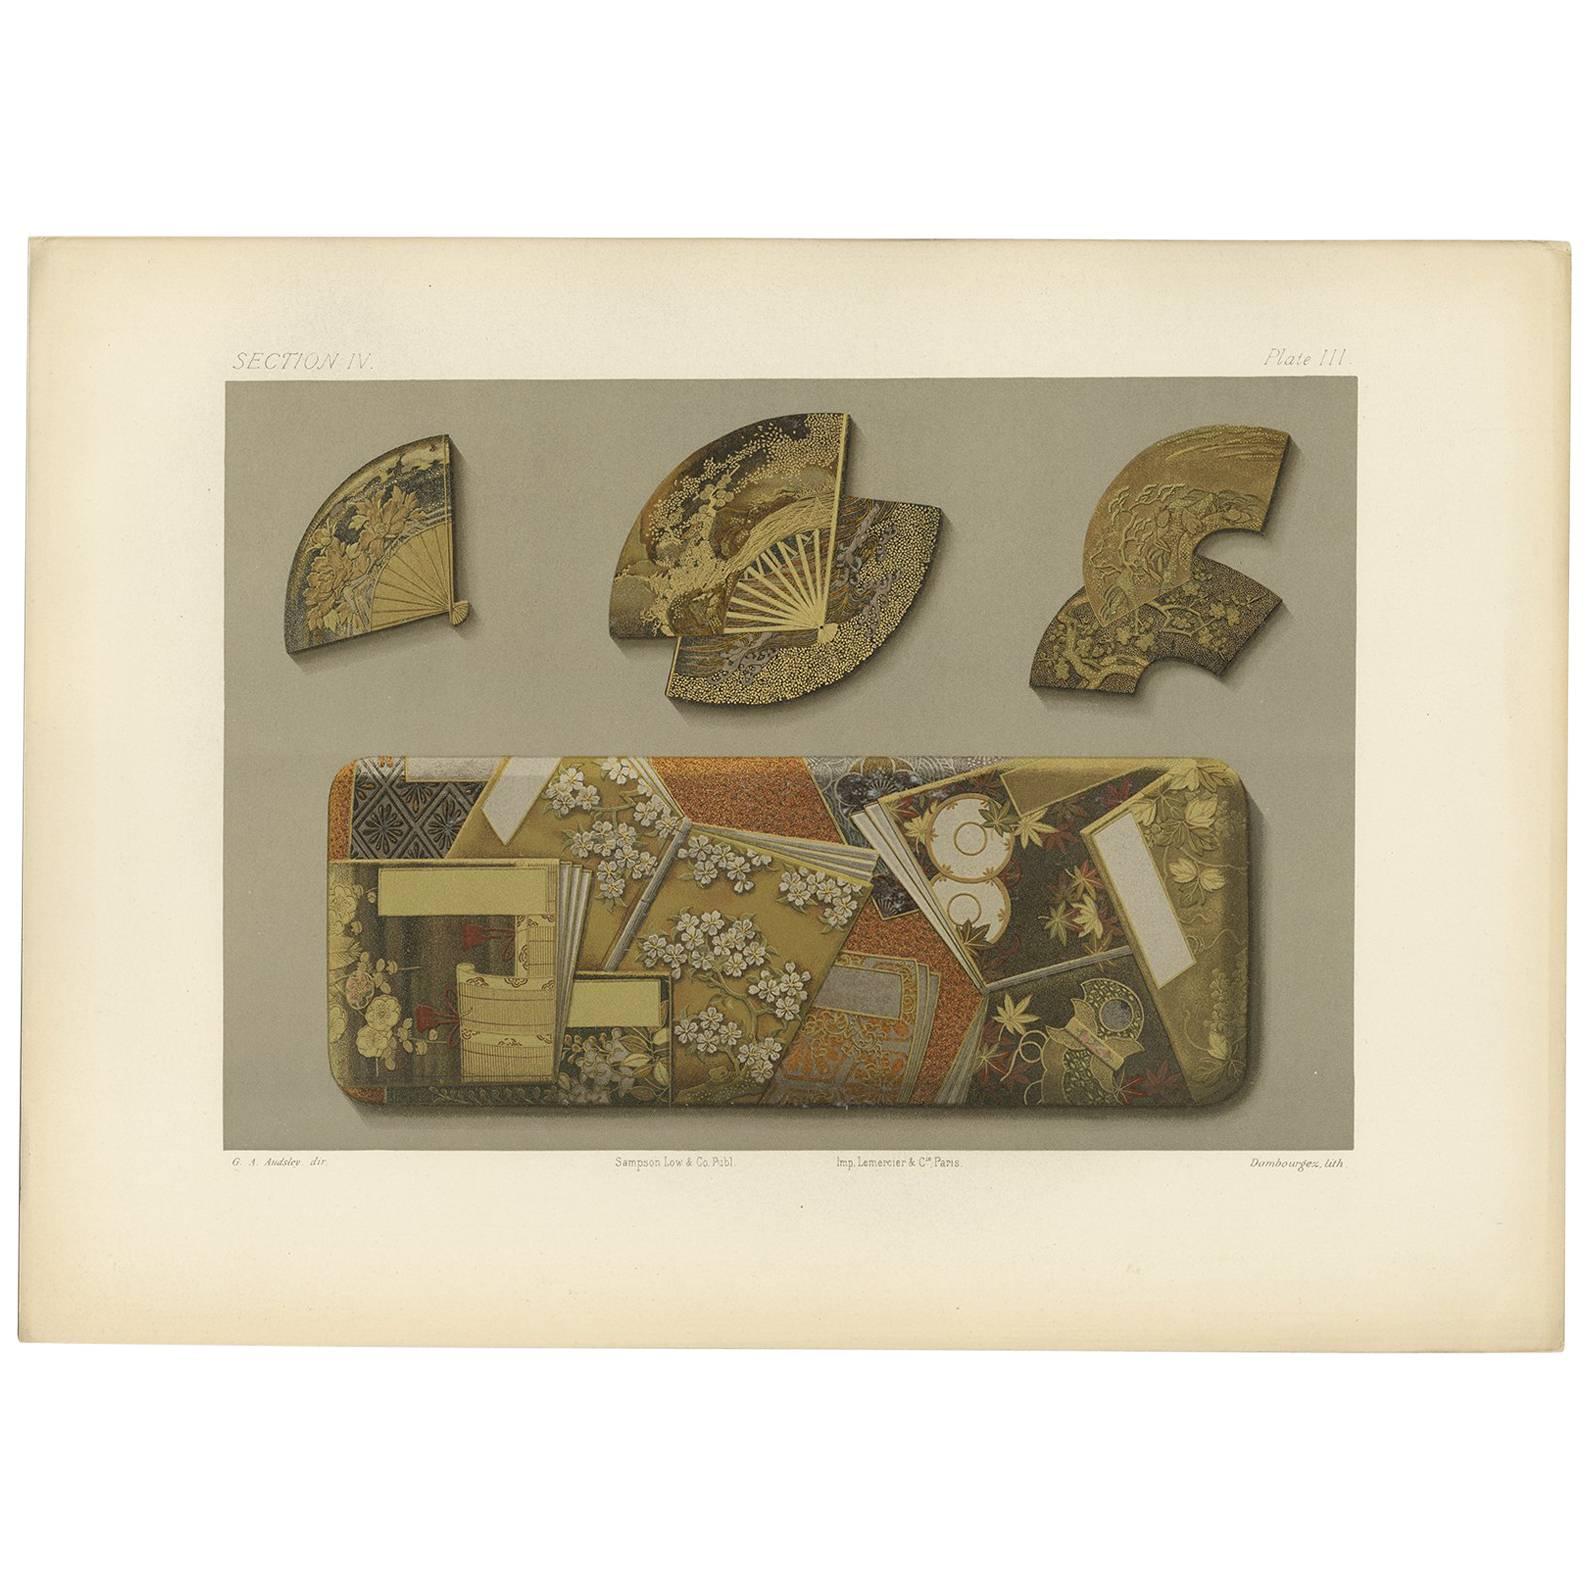 Antique Print of Four Japanese Boxes 'Lacquer' by G. Audsley, 1882